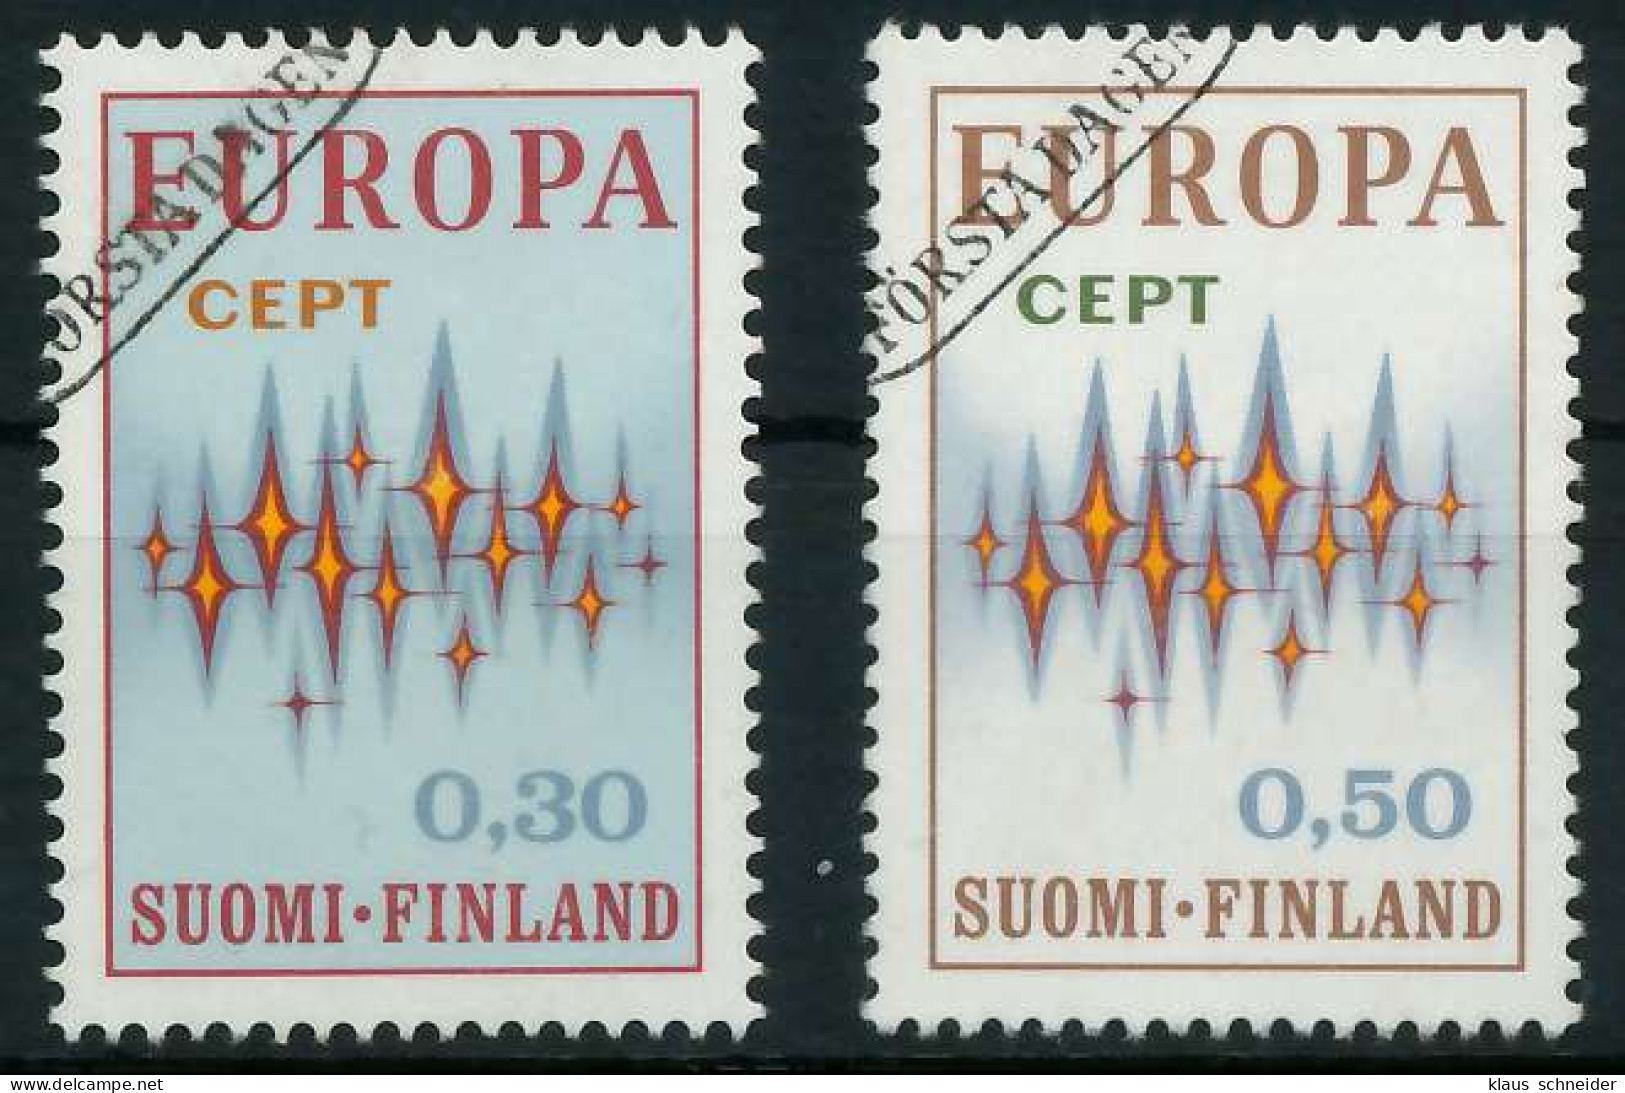 FINNLAND 1972 Nr 700-701 Gestempelt X04024A - Used Stamps